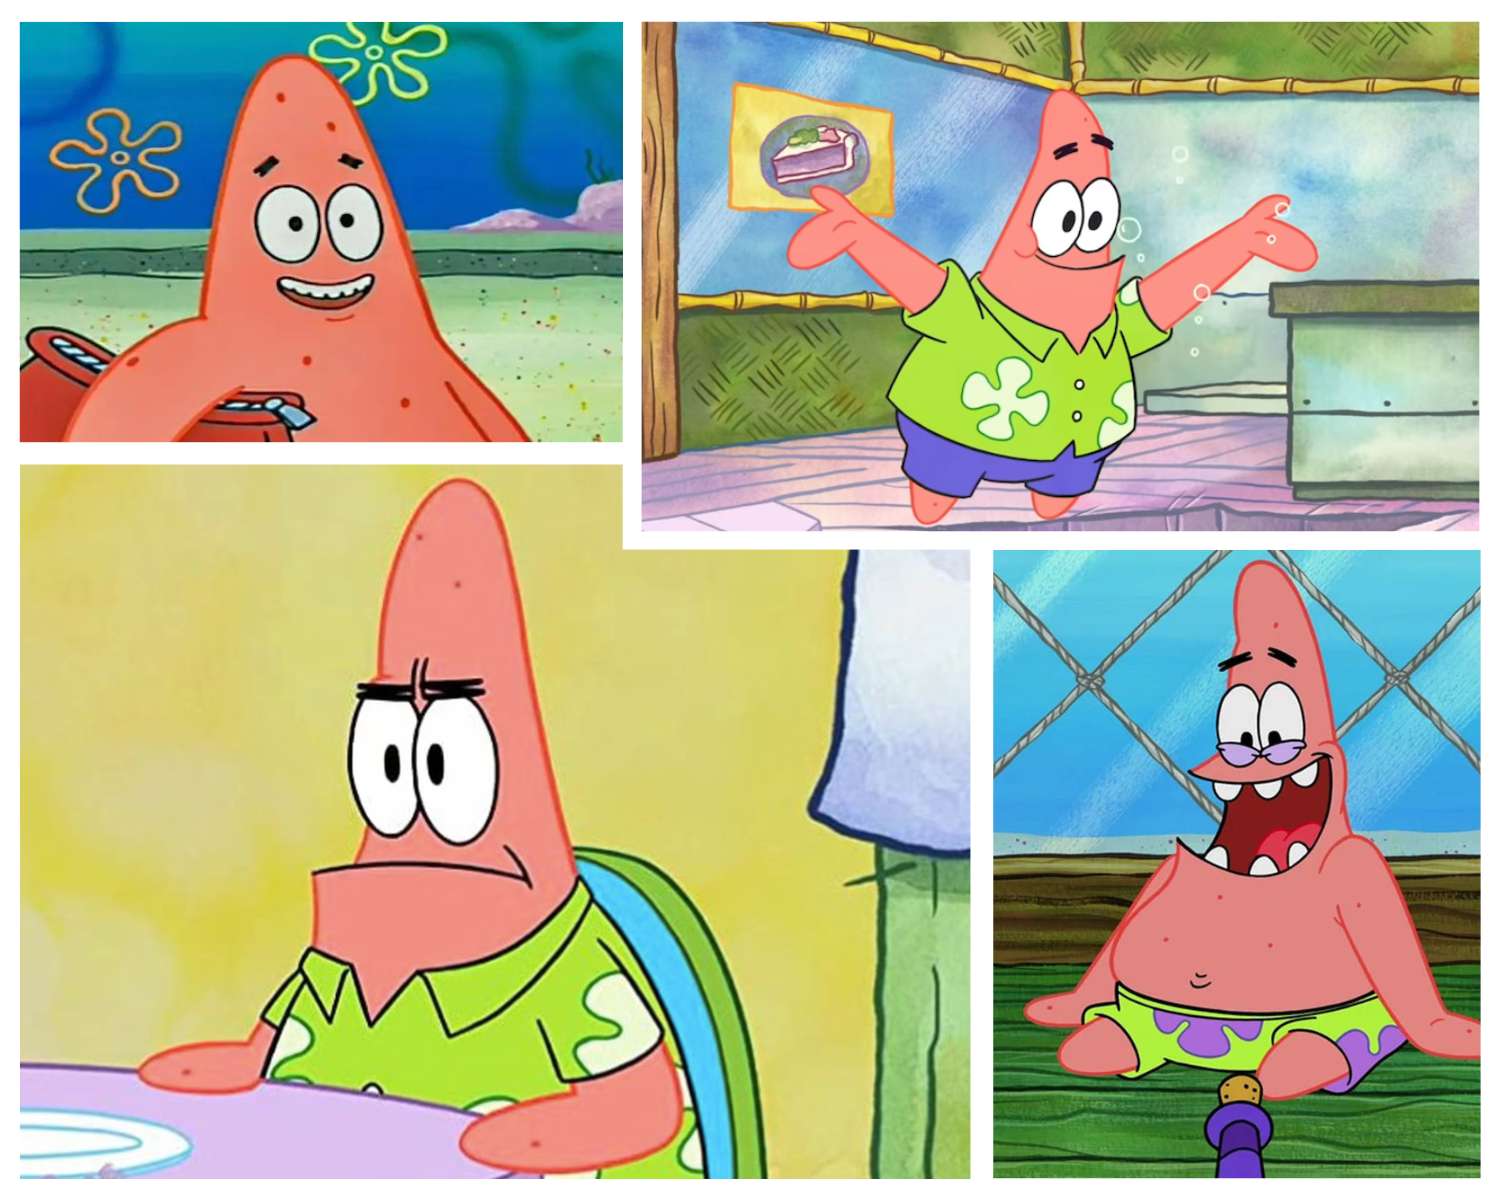 Patrick Star displaying a rare moment of wisdom